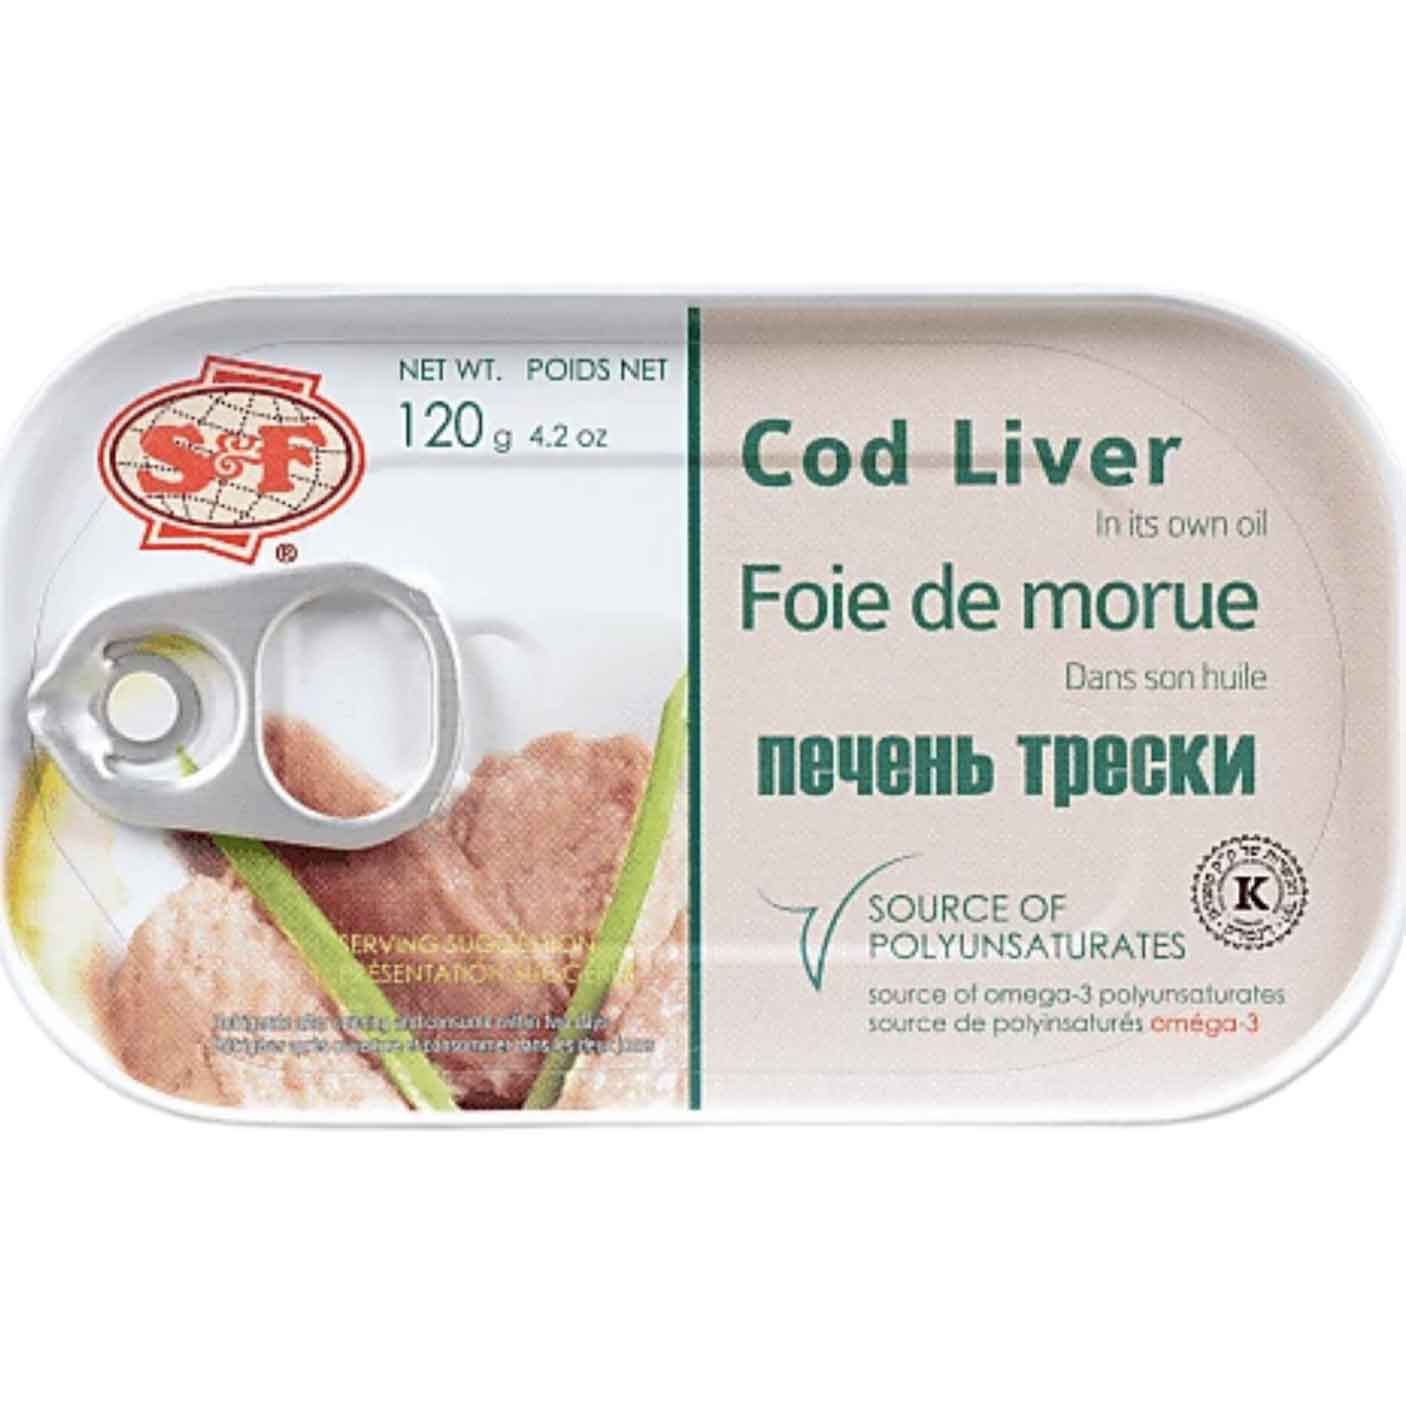 Cod Liver in its own Oil 120g